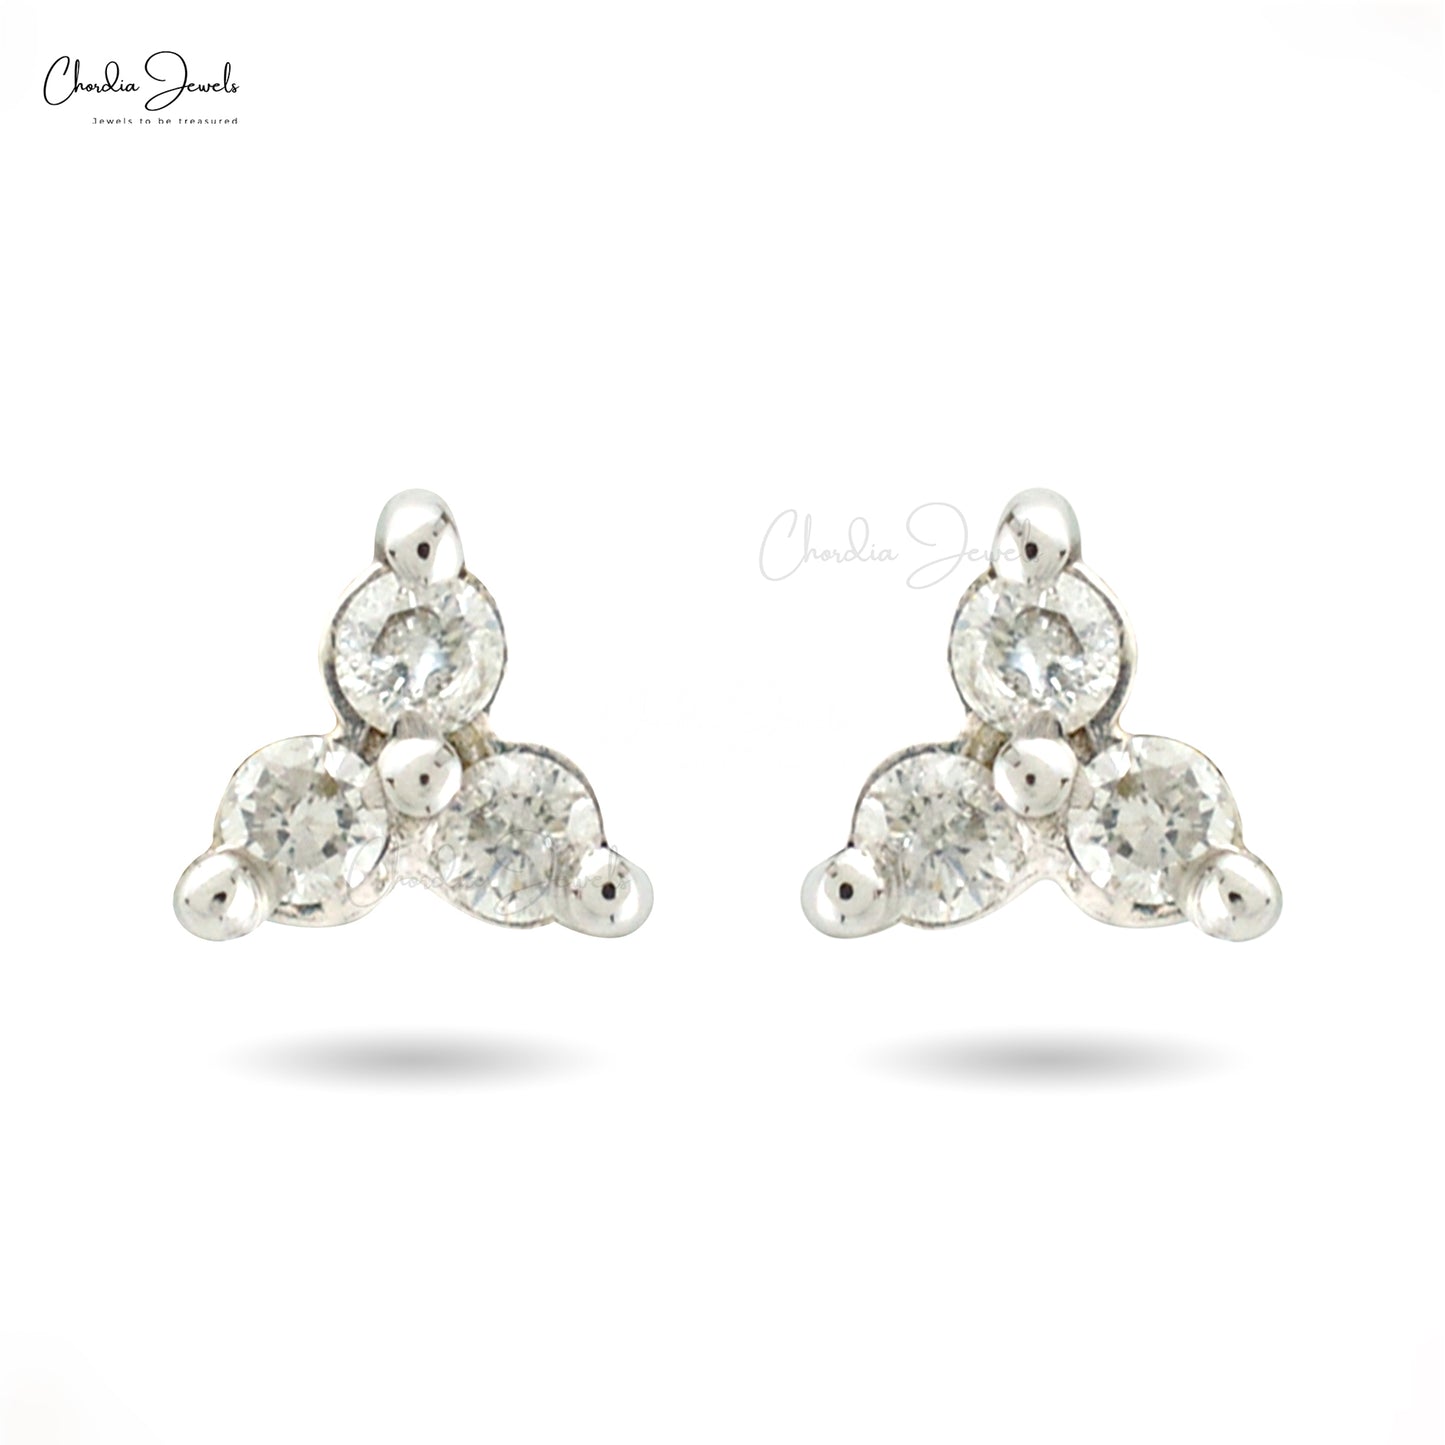 Complete your overall look with these Natural Diamond Studs